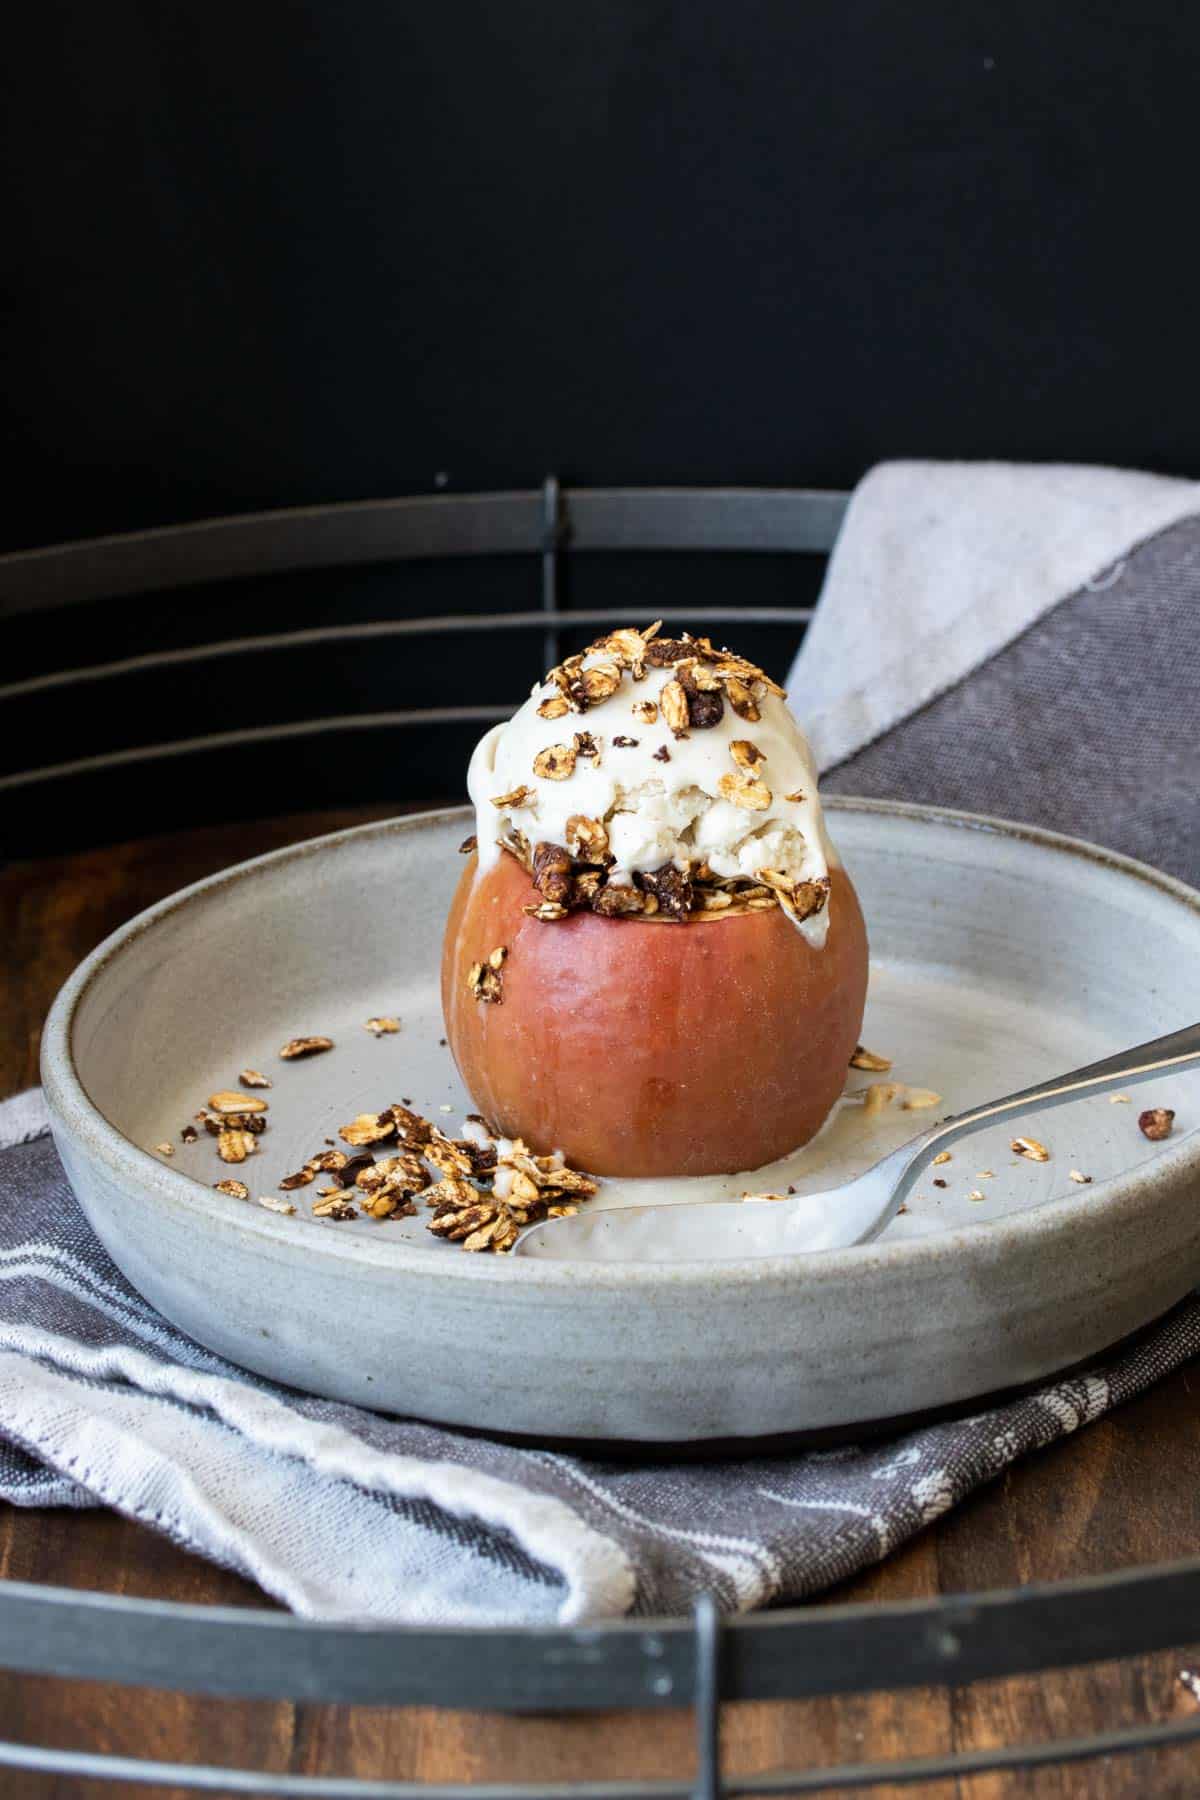 A whole baked apple topped with ice cream on a grey plate.